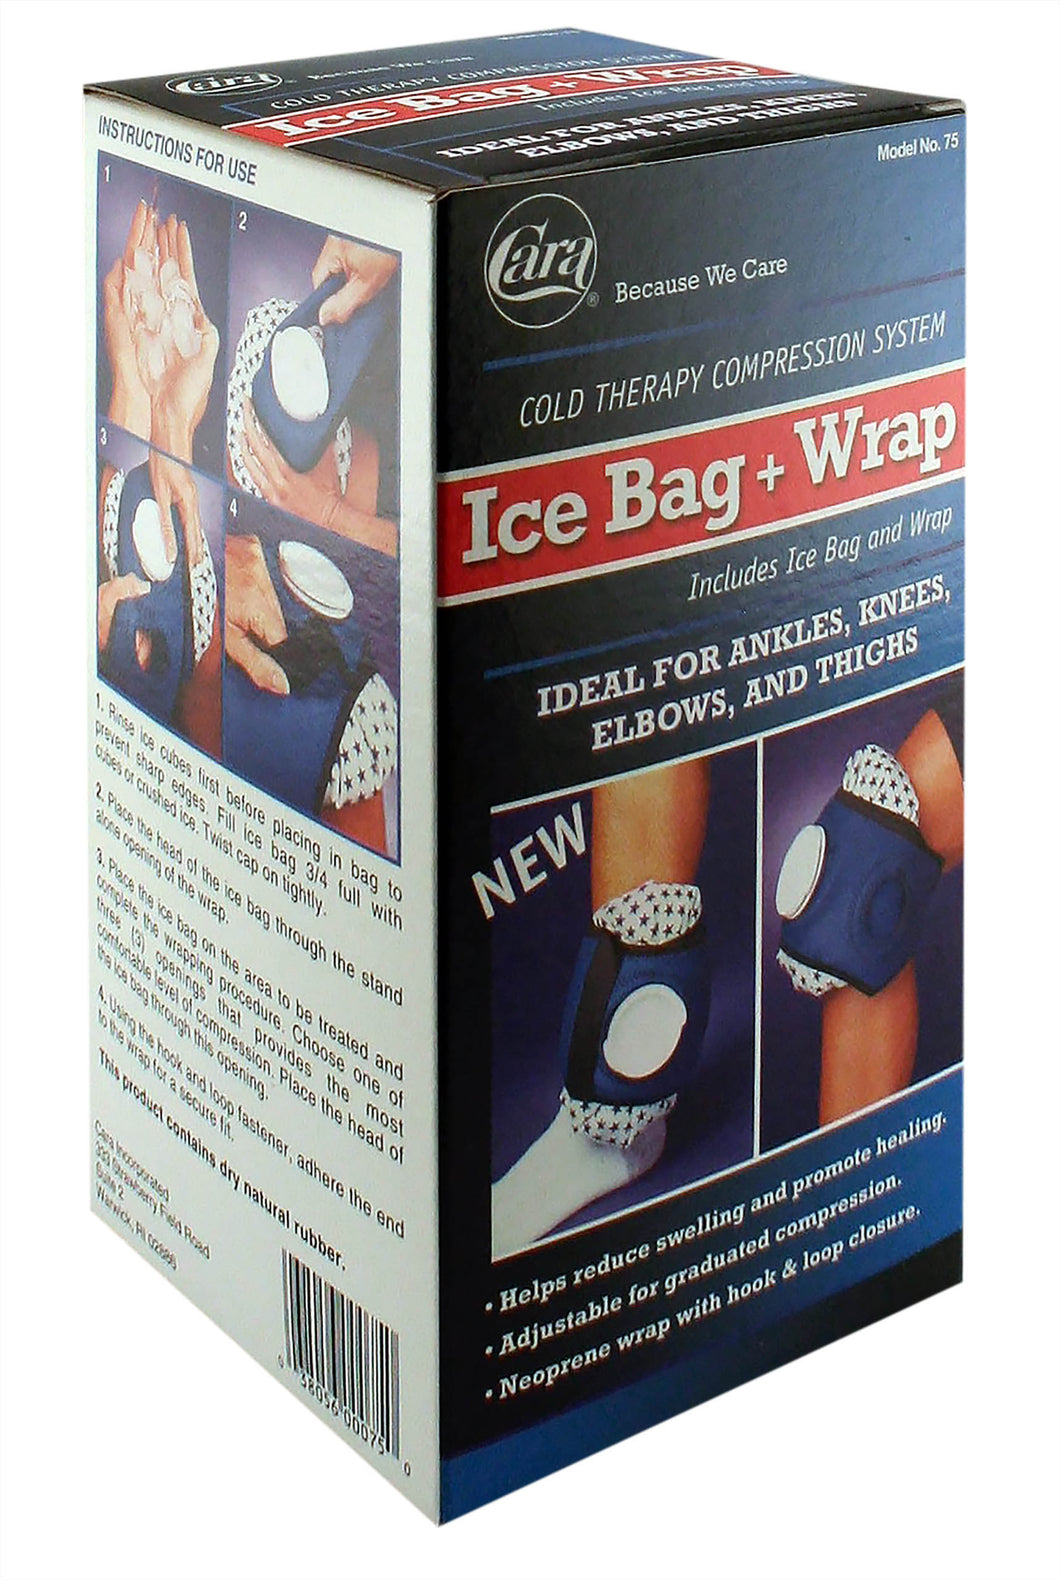 Model #75 Compression Wrap with Ice Bag